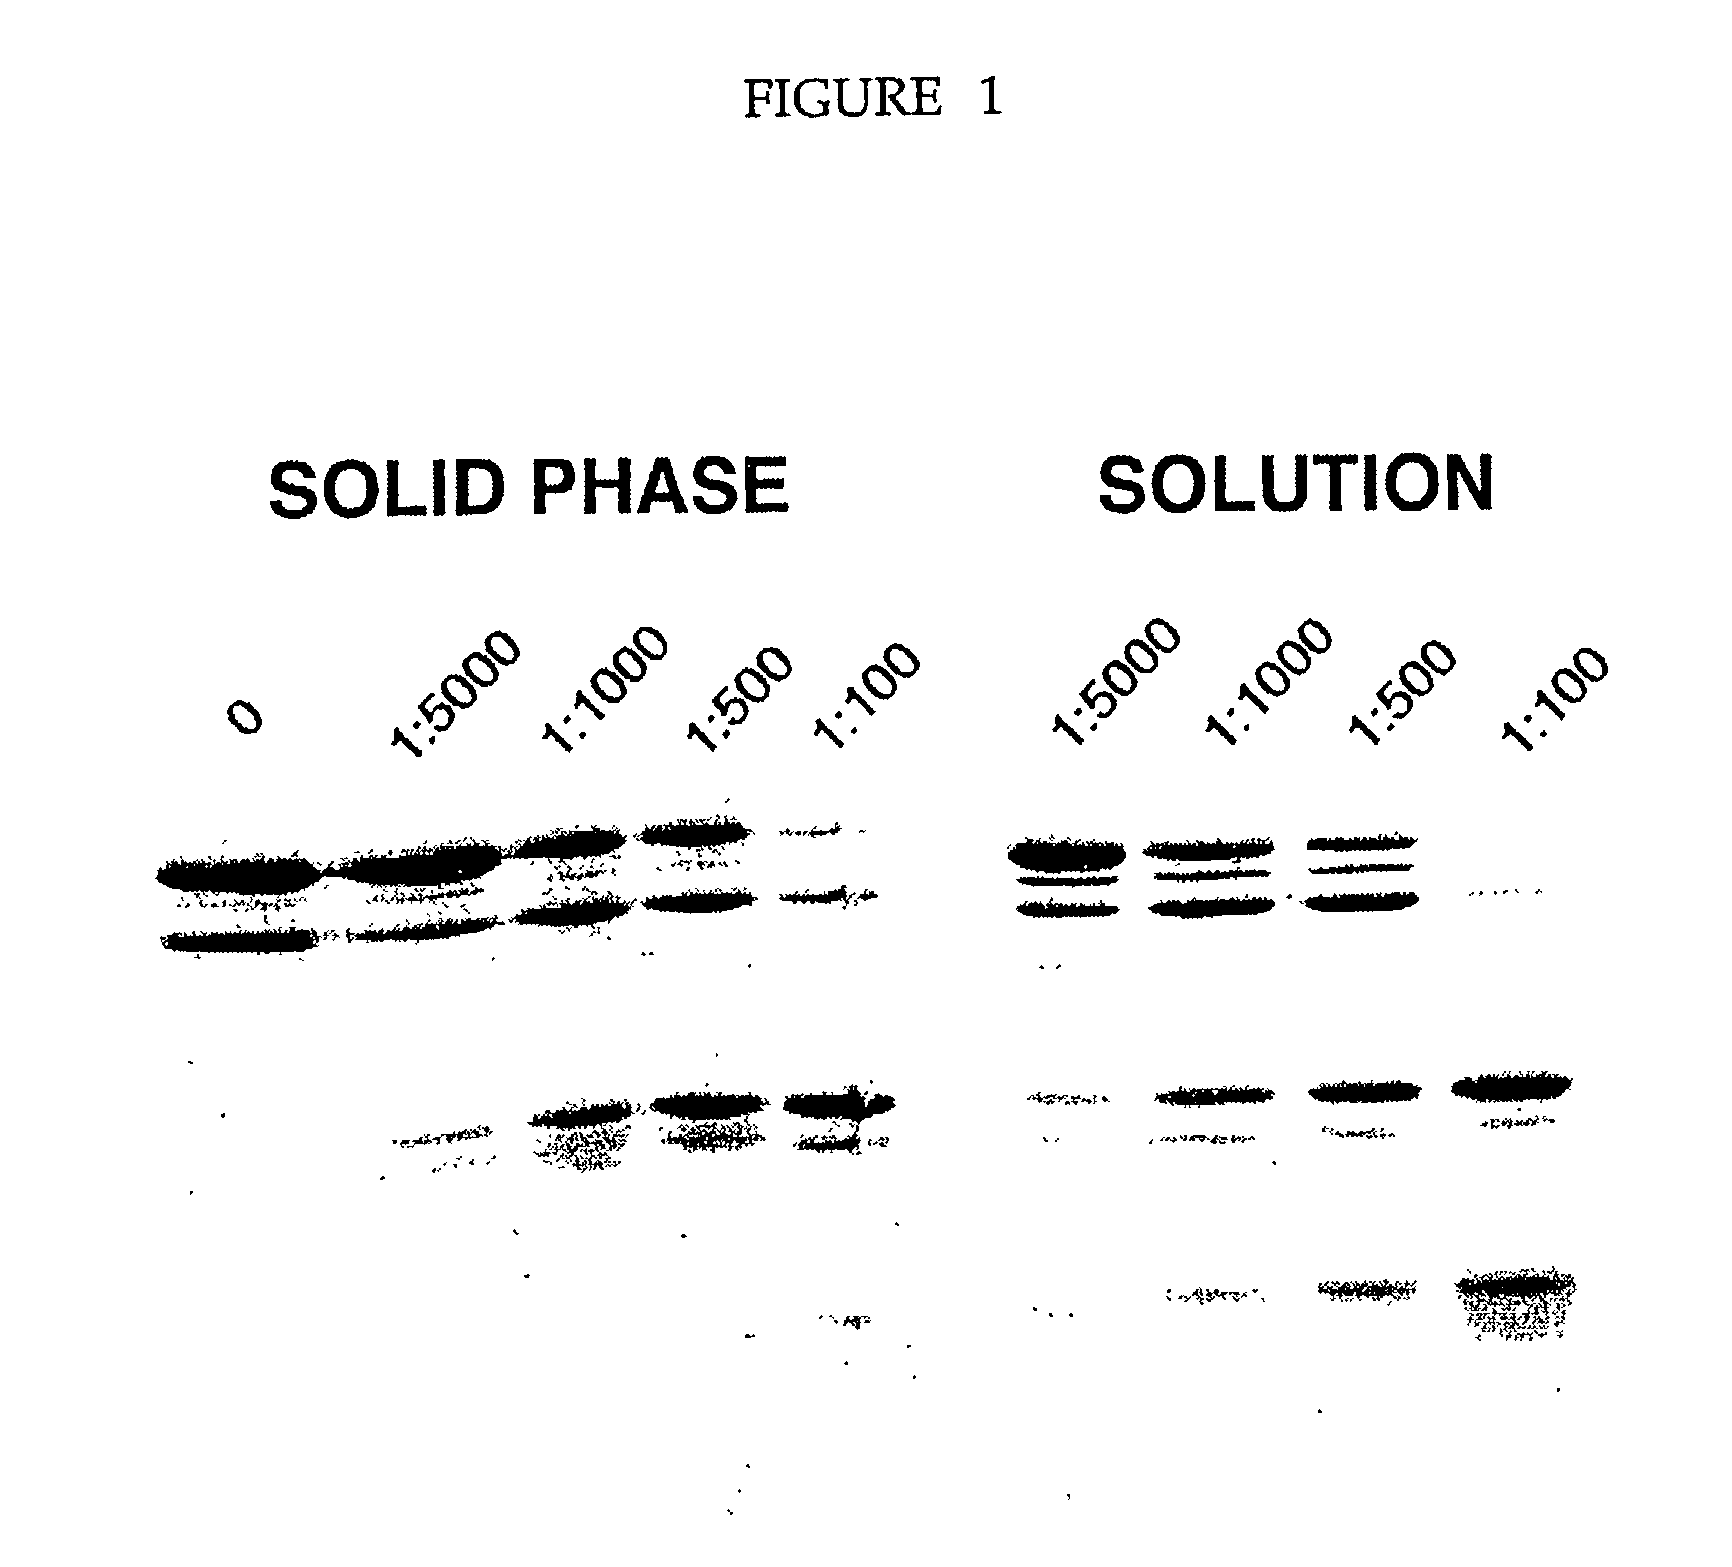 Device and method for the determination of protein domain boundaries